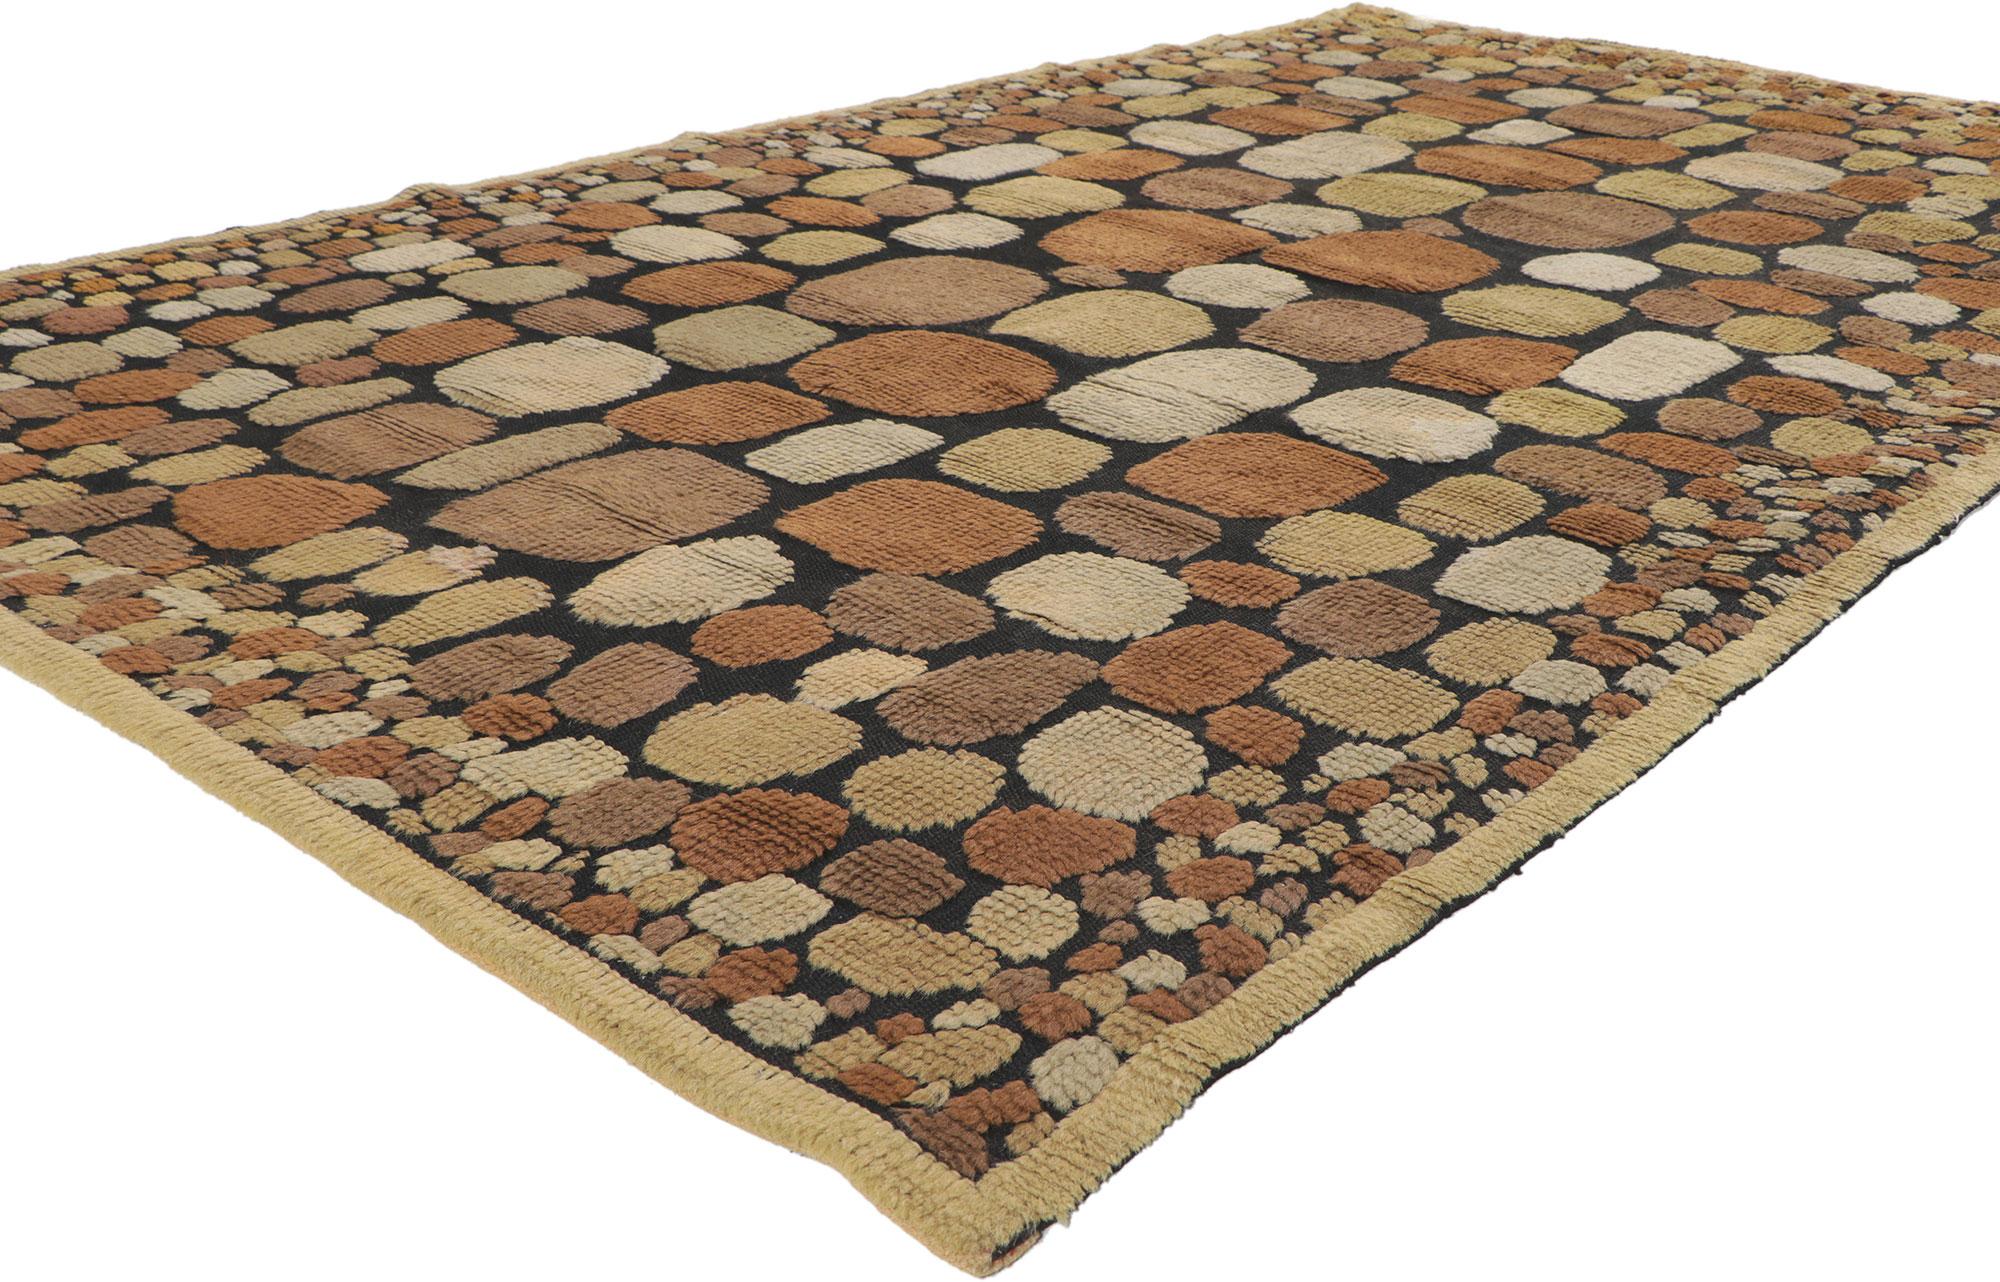 78491 Vintage Swedish Relief Halv-Flossa Rug, 05'02 x 08'09. Emanating Biophilic Design with incredible detail and texture, this vintage Swedish relief rug is a captivating vision of woven beauty. The raised design and earthy colorway woven into